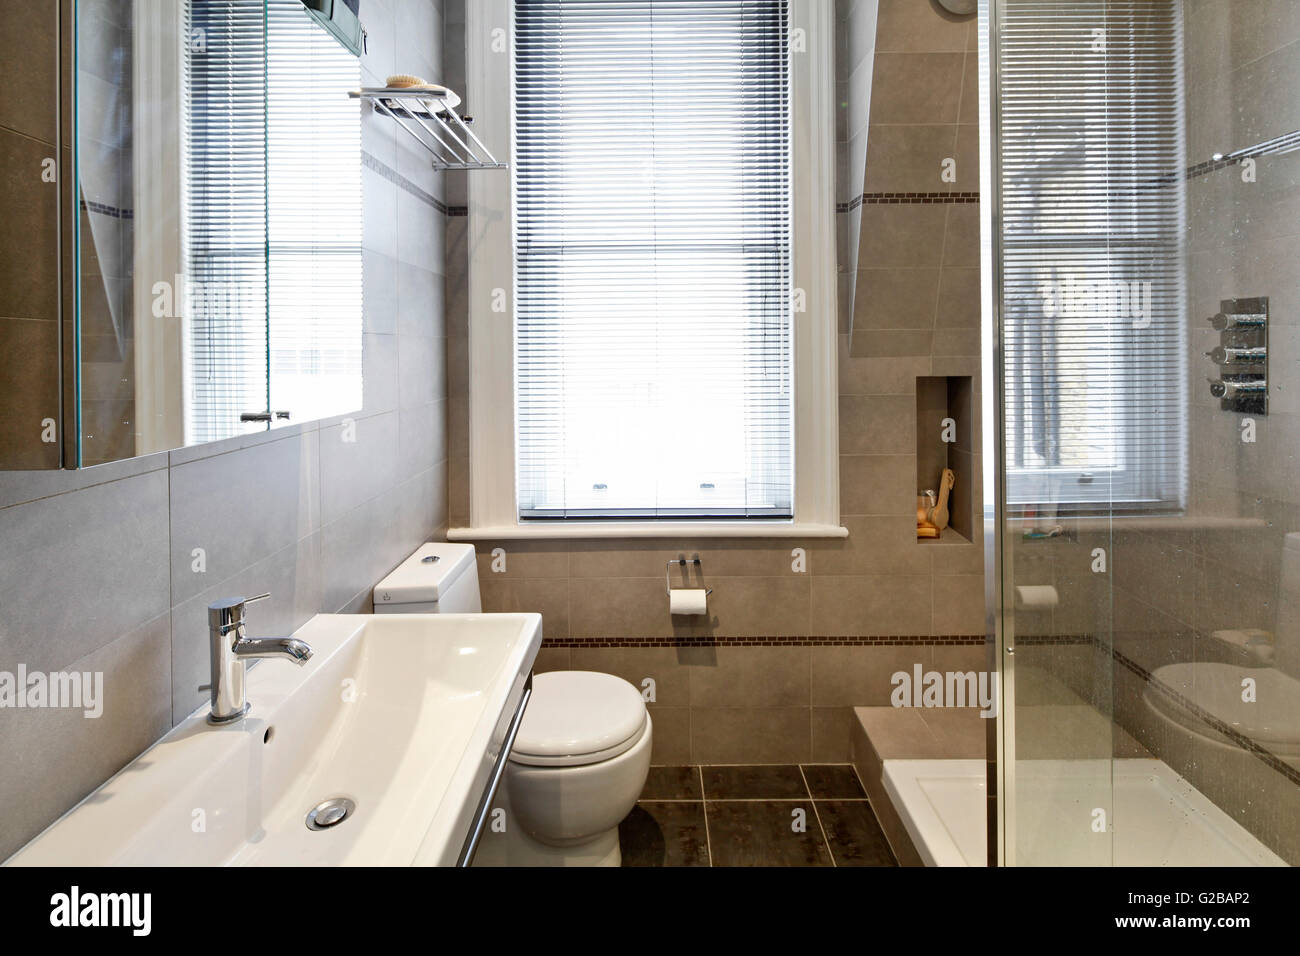 Walden House, Marylebone High Street. Modern bathroom with glass shower door and white features. Stock Photo